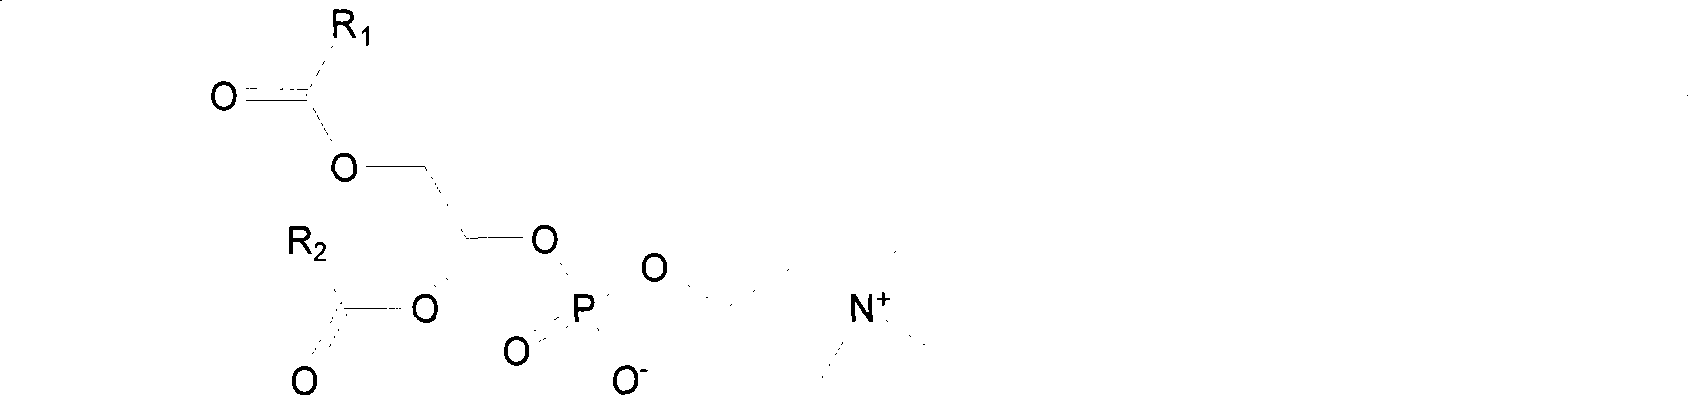 5-fluorouracil-sn2-phosphatidyl choline copolymer as well as preparation method and application thereof